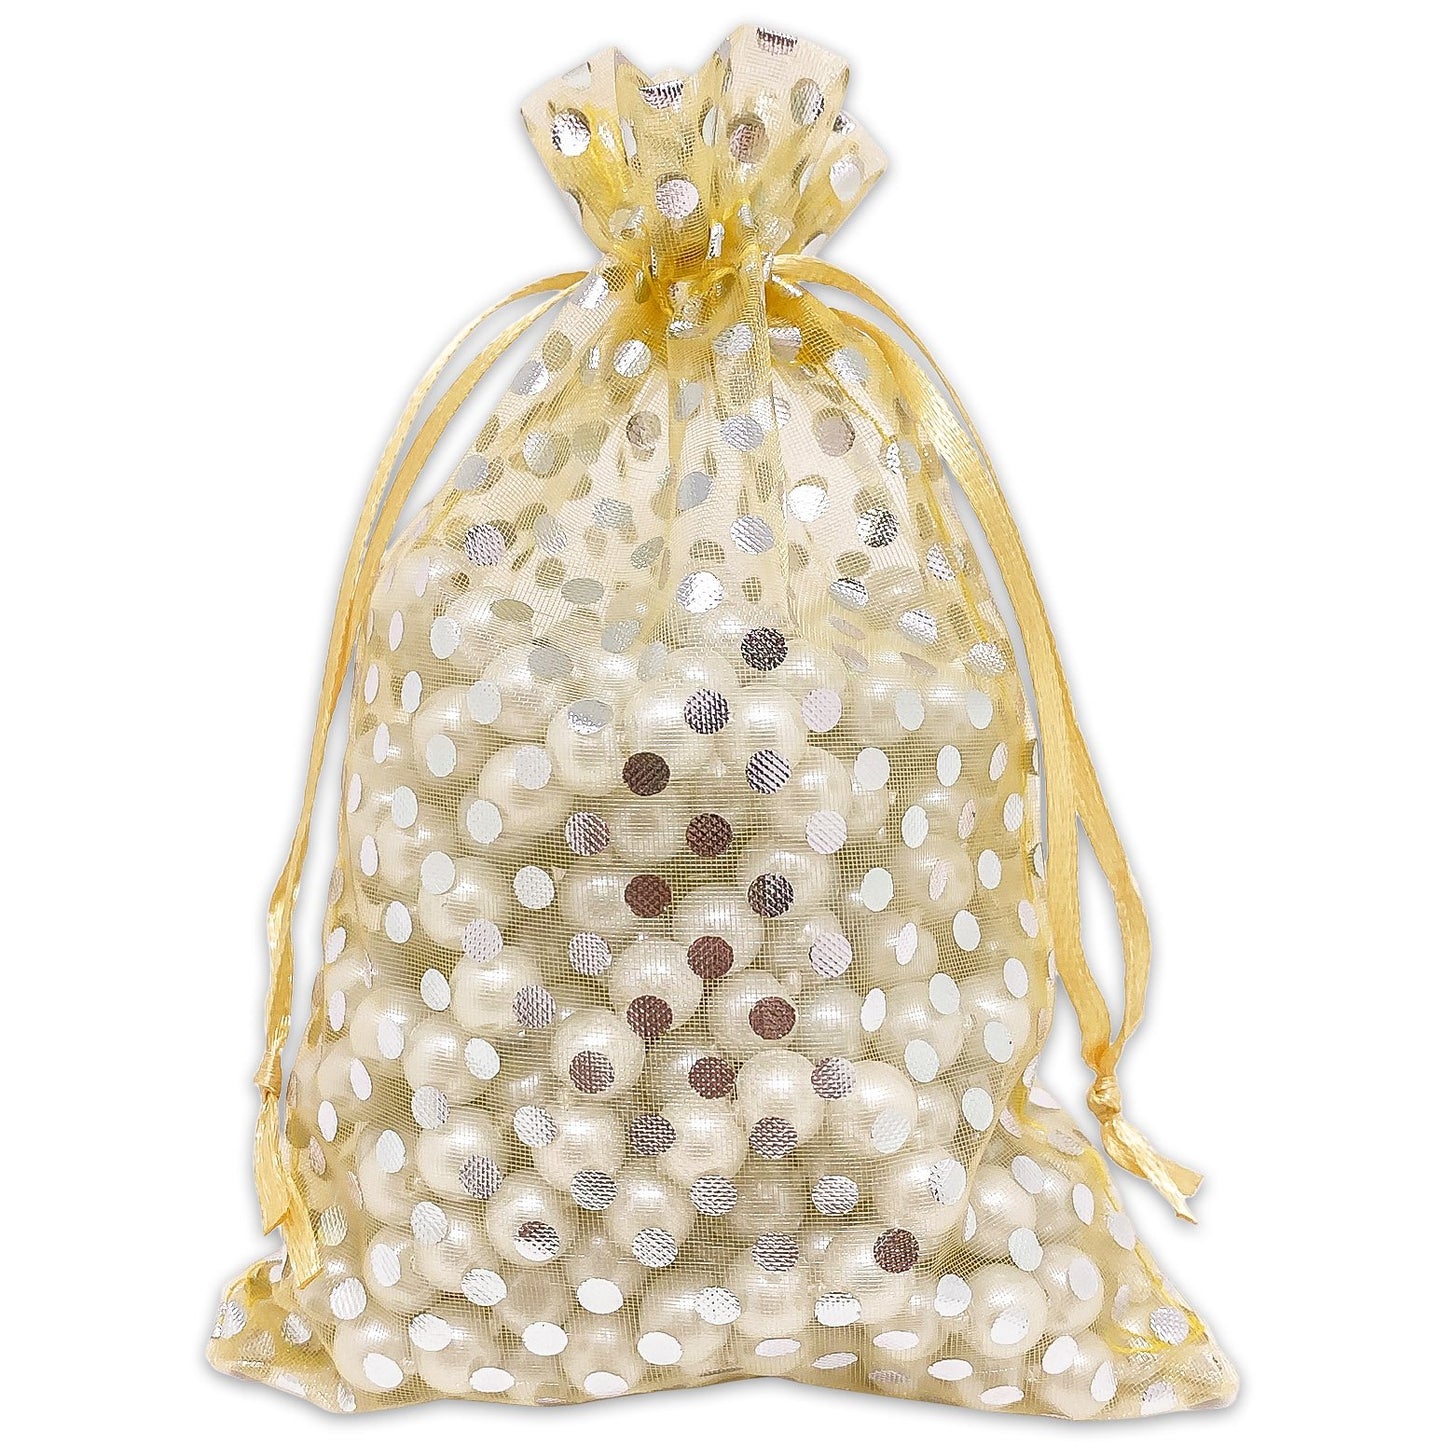 Gold with Silver Polka Dot Organza Drawstring Pouch Gift Bags